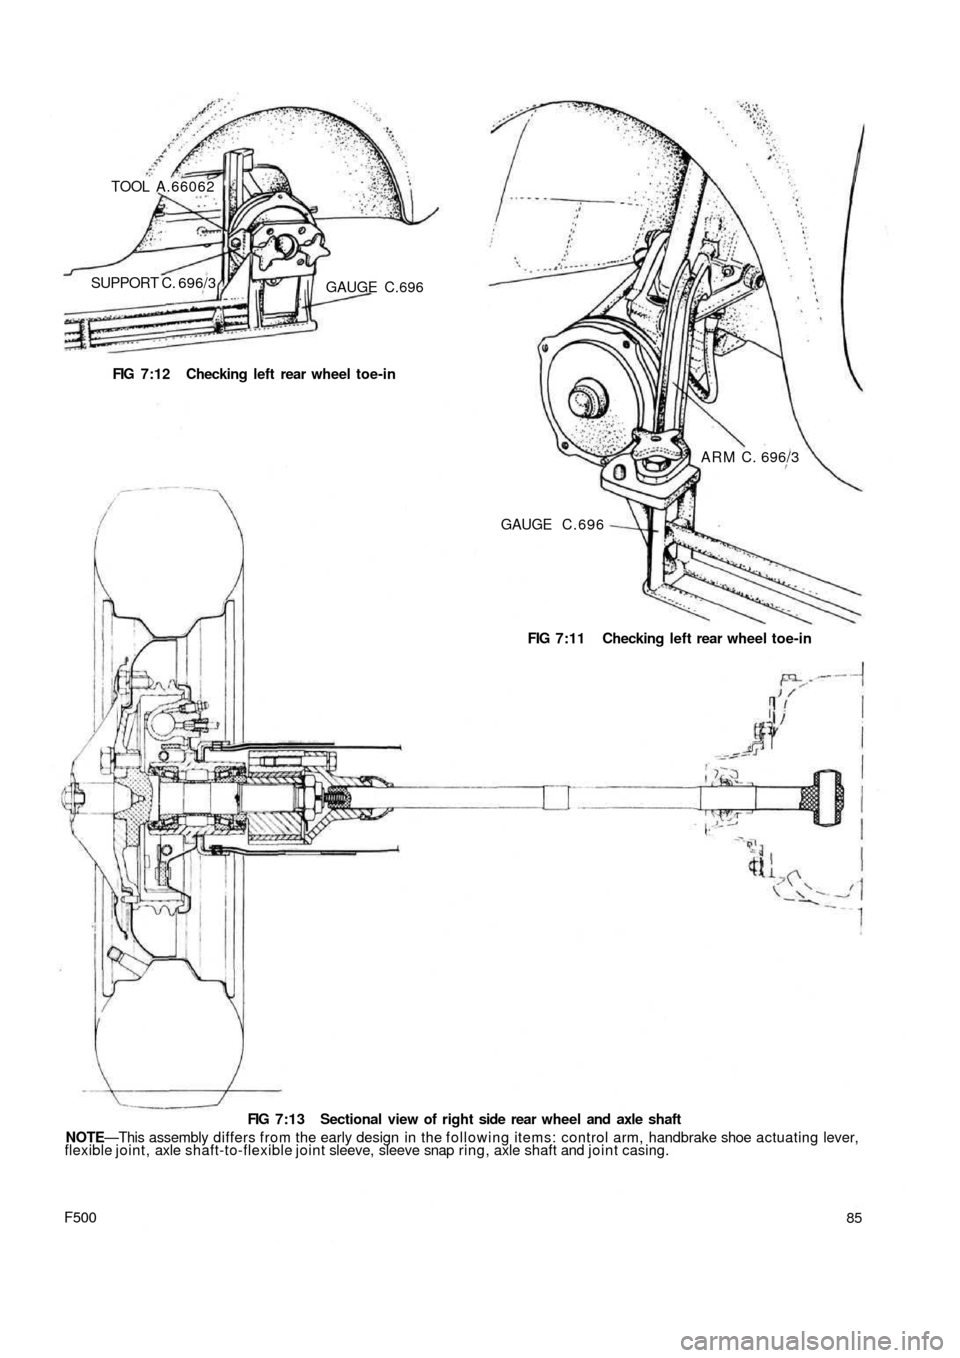 FIAT 500 1960 1.G Workshop Manual TOOL A.66062
SUPPORT C. 696/3GAUGE C.696
FIG 7:12 Checking left rear wheel toe-in
ARM C. 696/3
GAUGE C . 6 9 6
FIG 7:11 Checking left rear wheel toe-in
F500
FIG 7:13 Sectional view of right side rear 